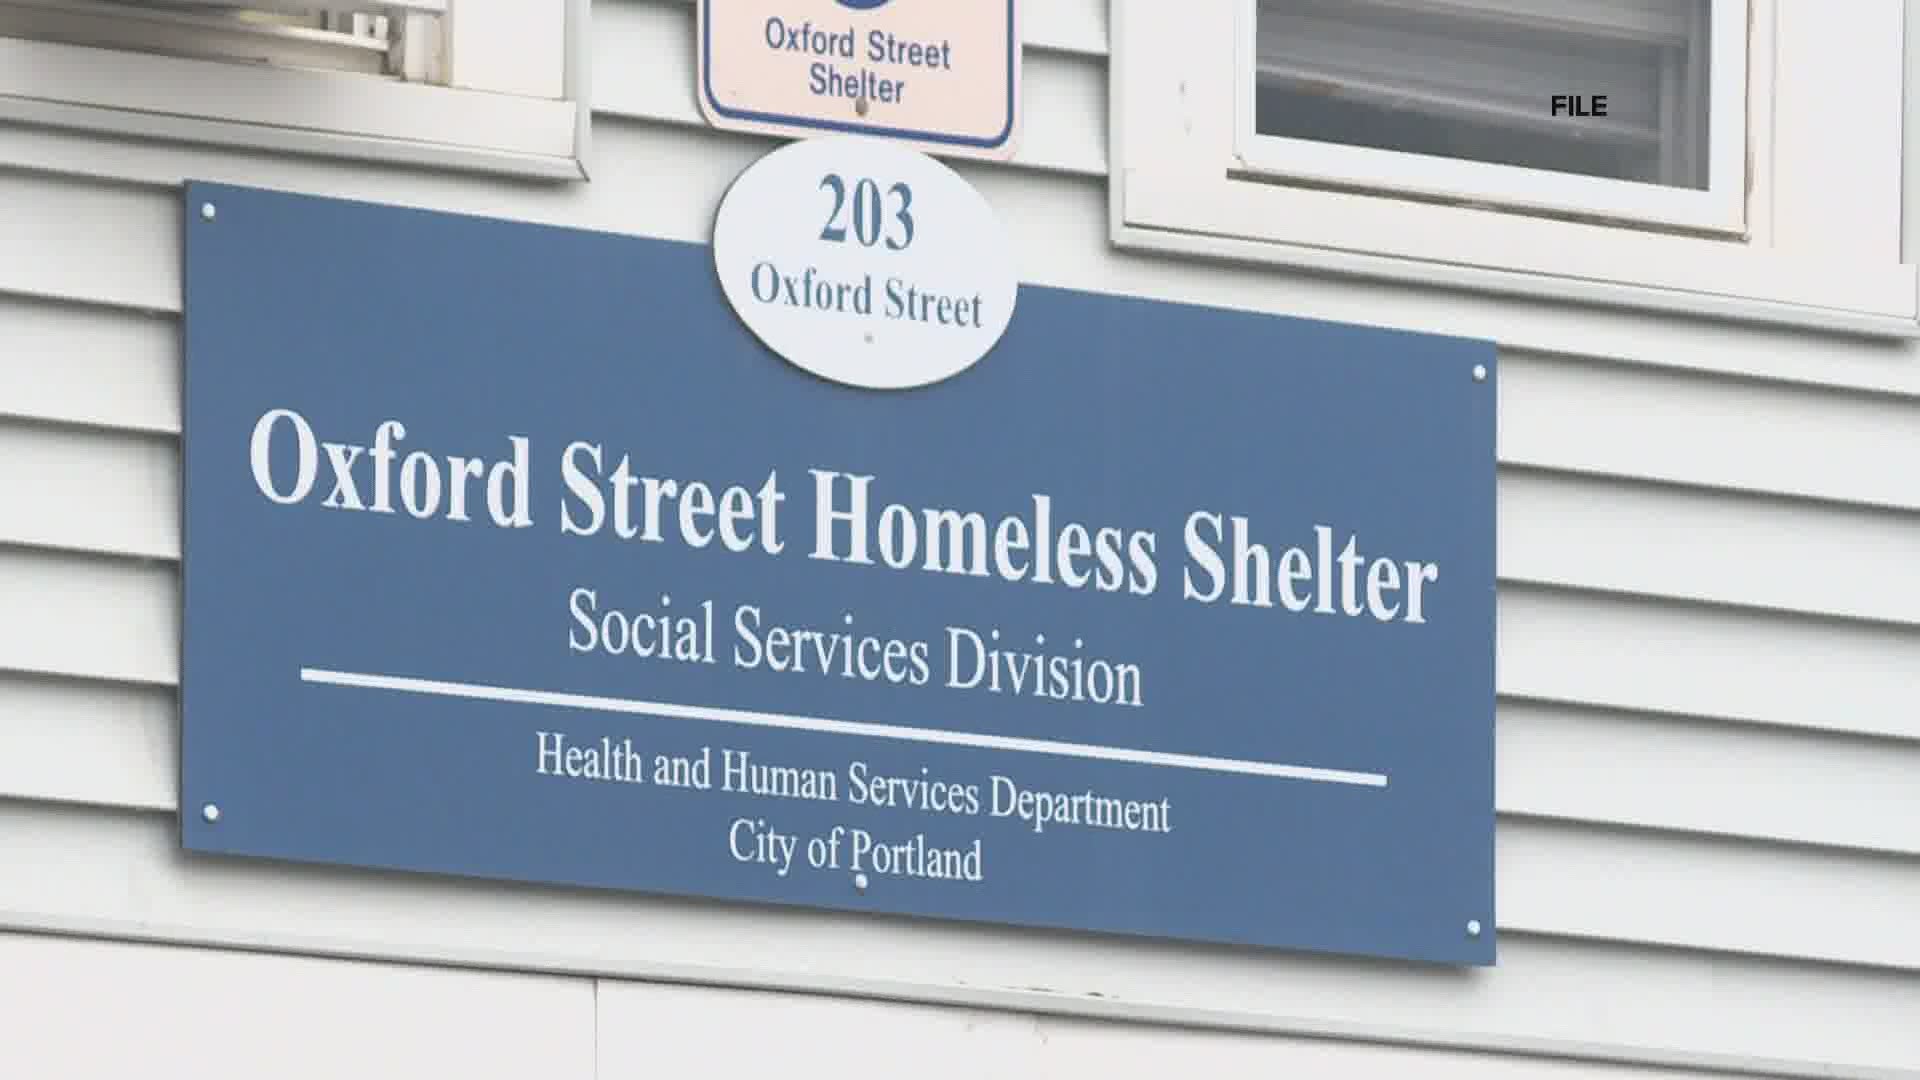 The Oxford Street Homeless Shelter in Portland has temporarily banned any newly arrived homeless people from staying there